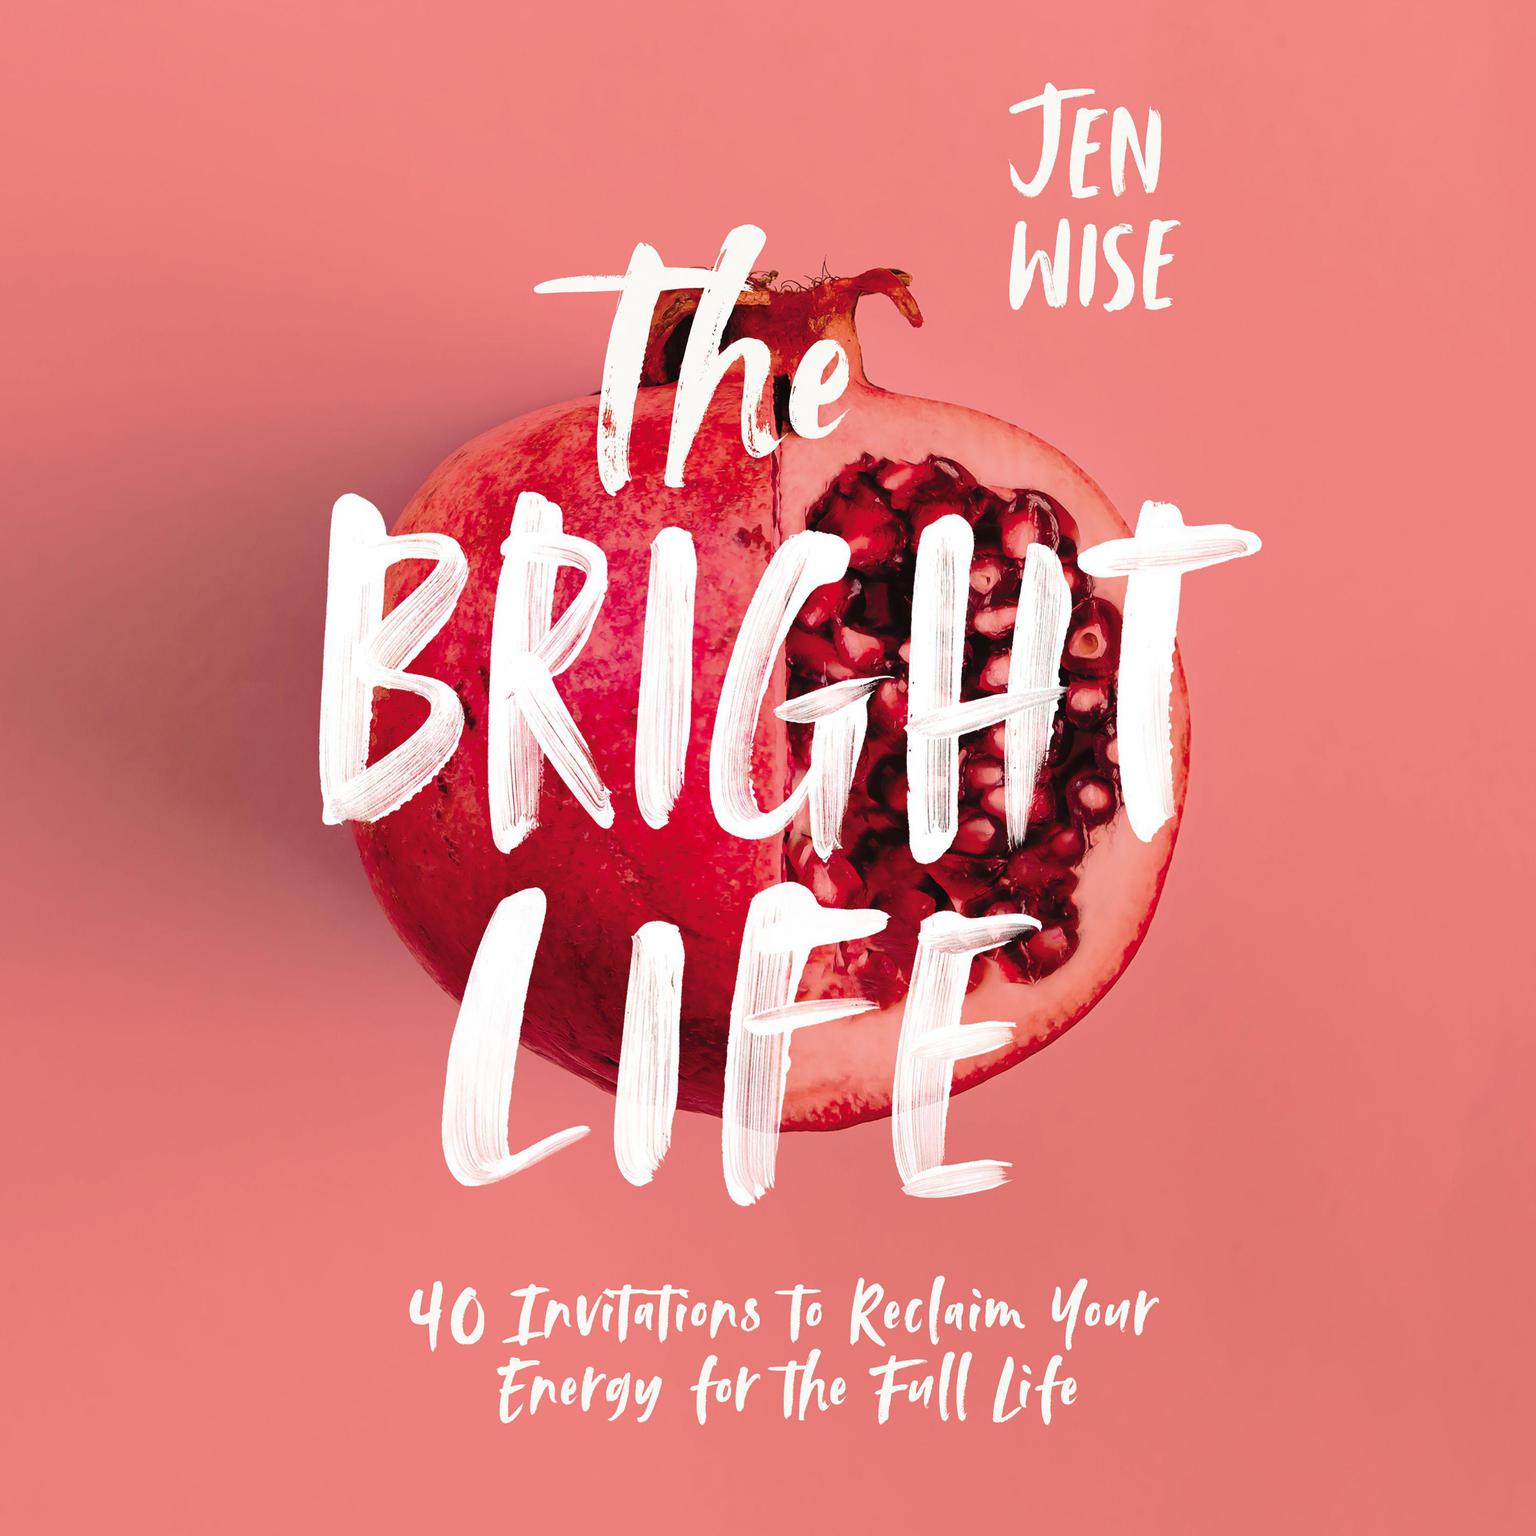 The Bright Life: 40 Invitations to Reclaim Your Energy for the Full Life Audiobook, by Jen Wise